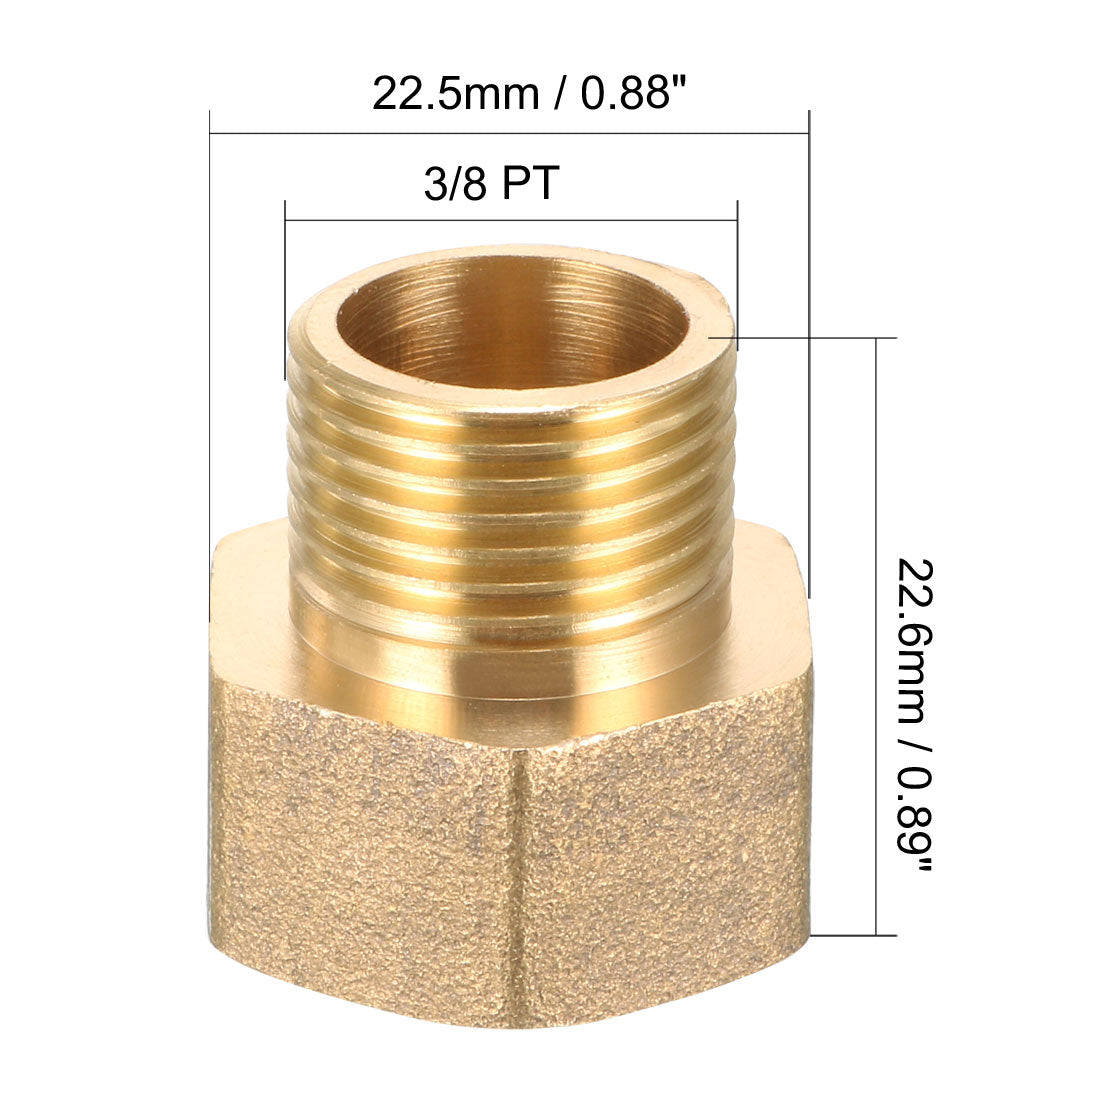 uxcell Uxcell Brass Threaded Pipe Fitting 3/8 PT Male x 1/2 PT Female Coupling